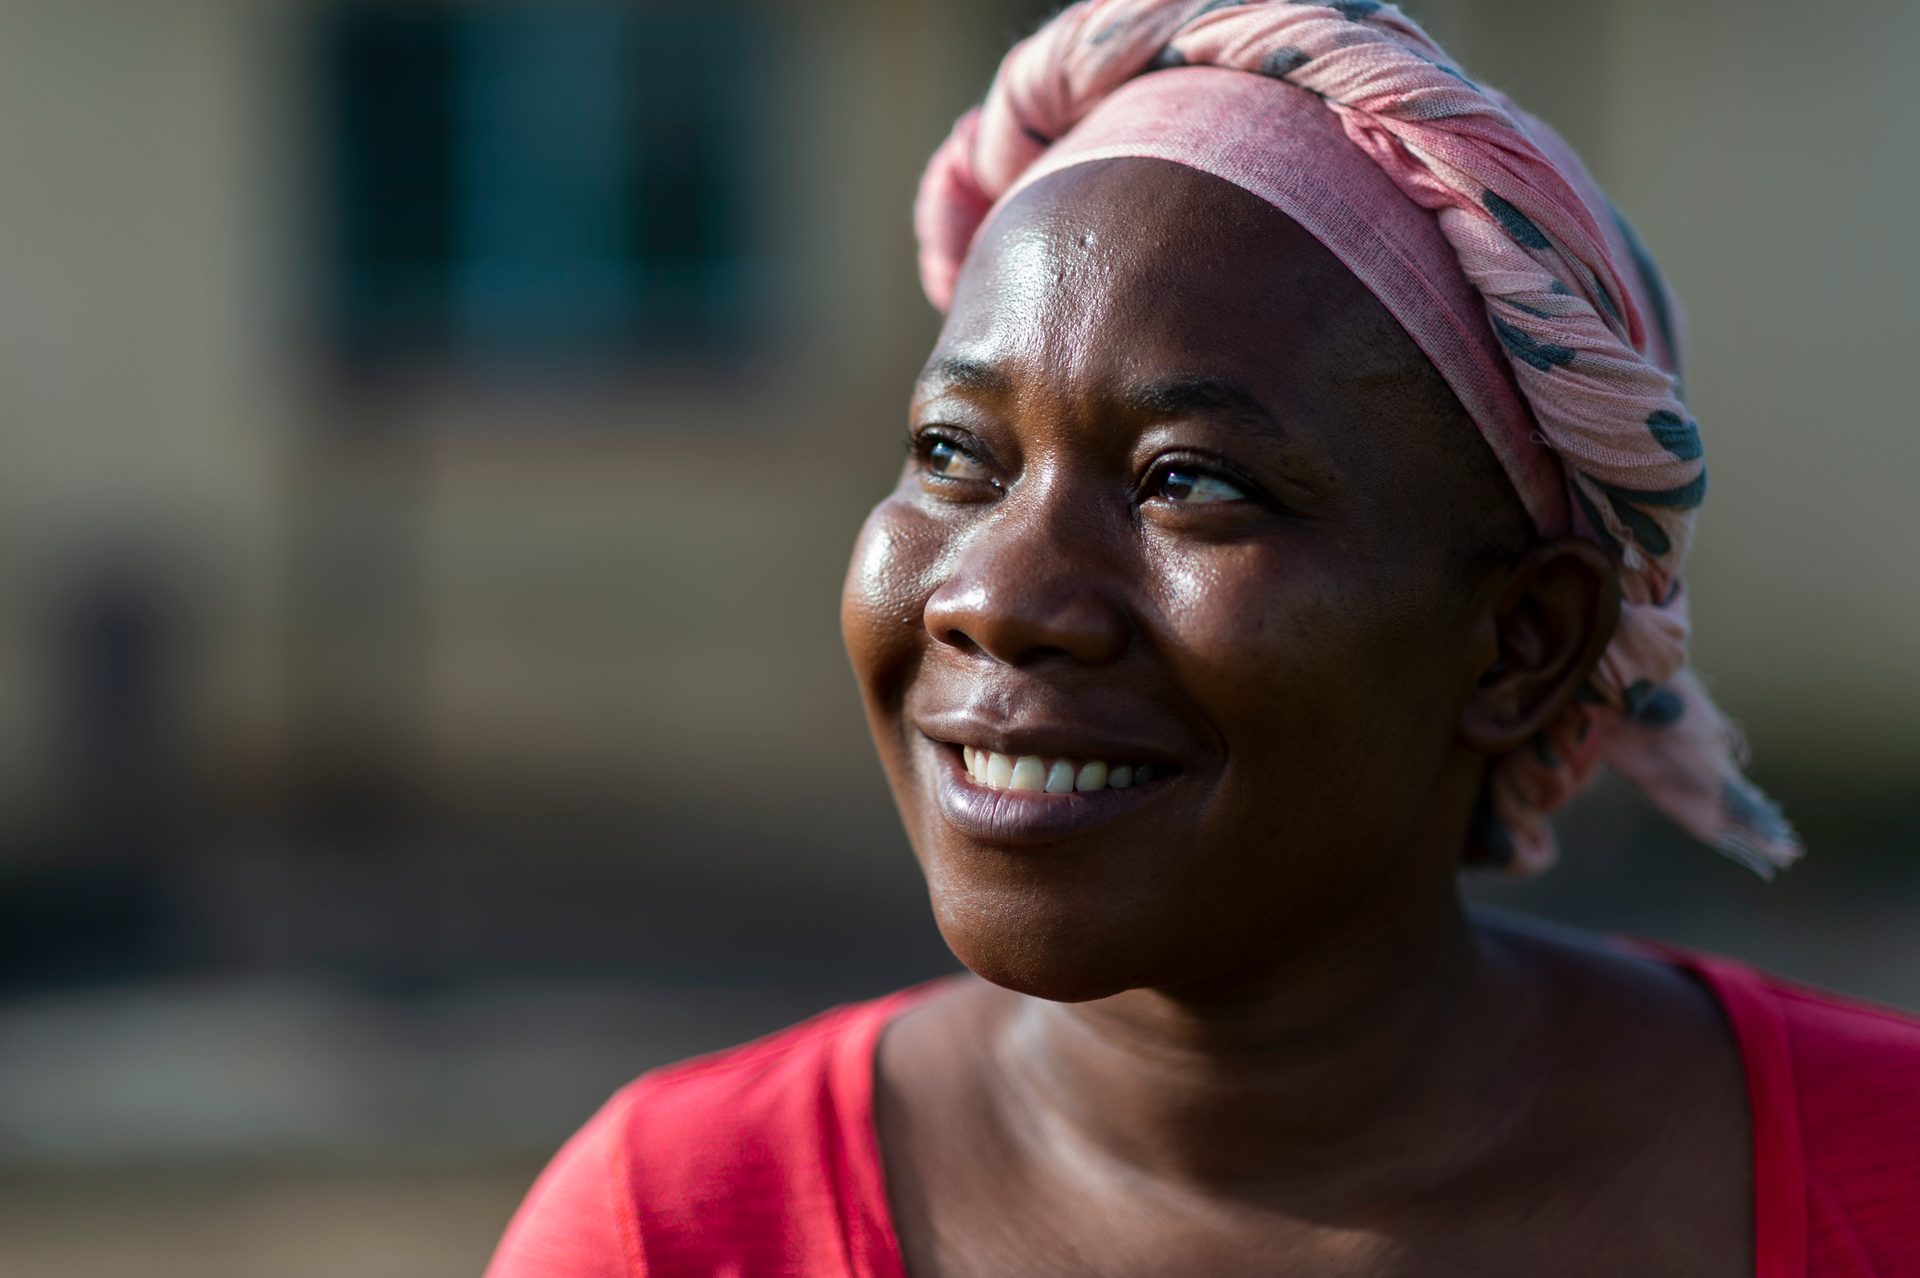 Image depicts an african woman smiling and looking off in to the distance. She is a breast cancer survivor wearing a pink hair wrap.